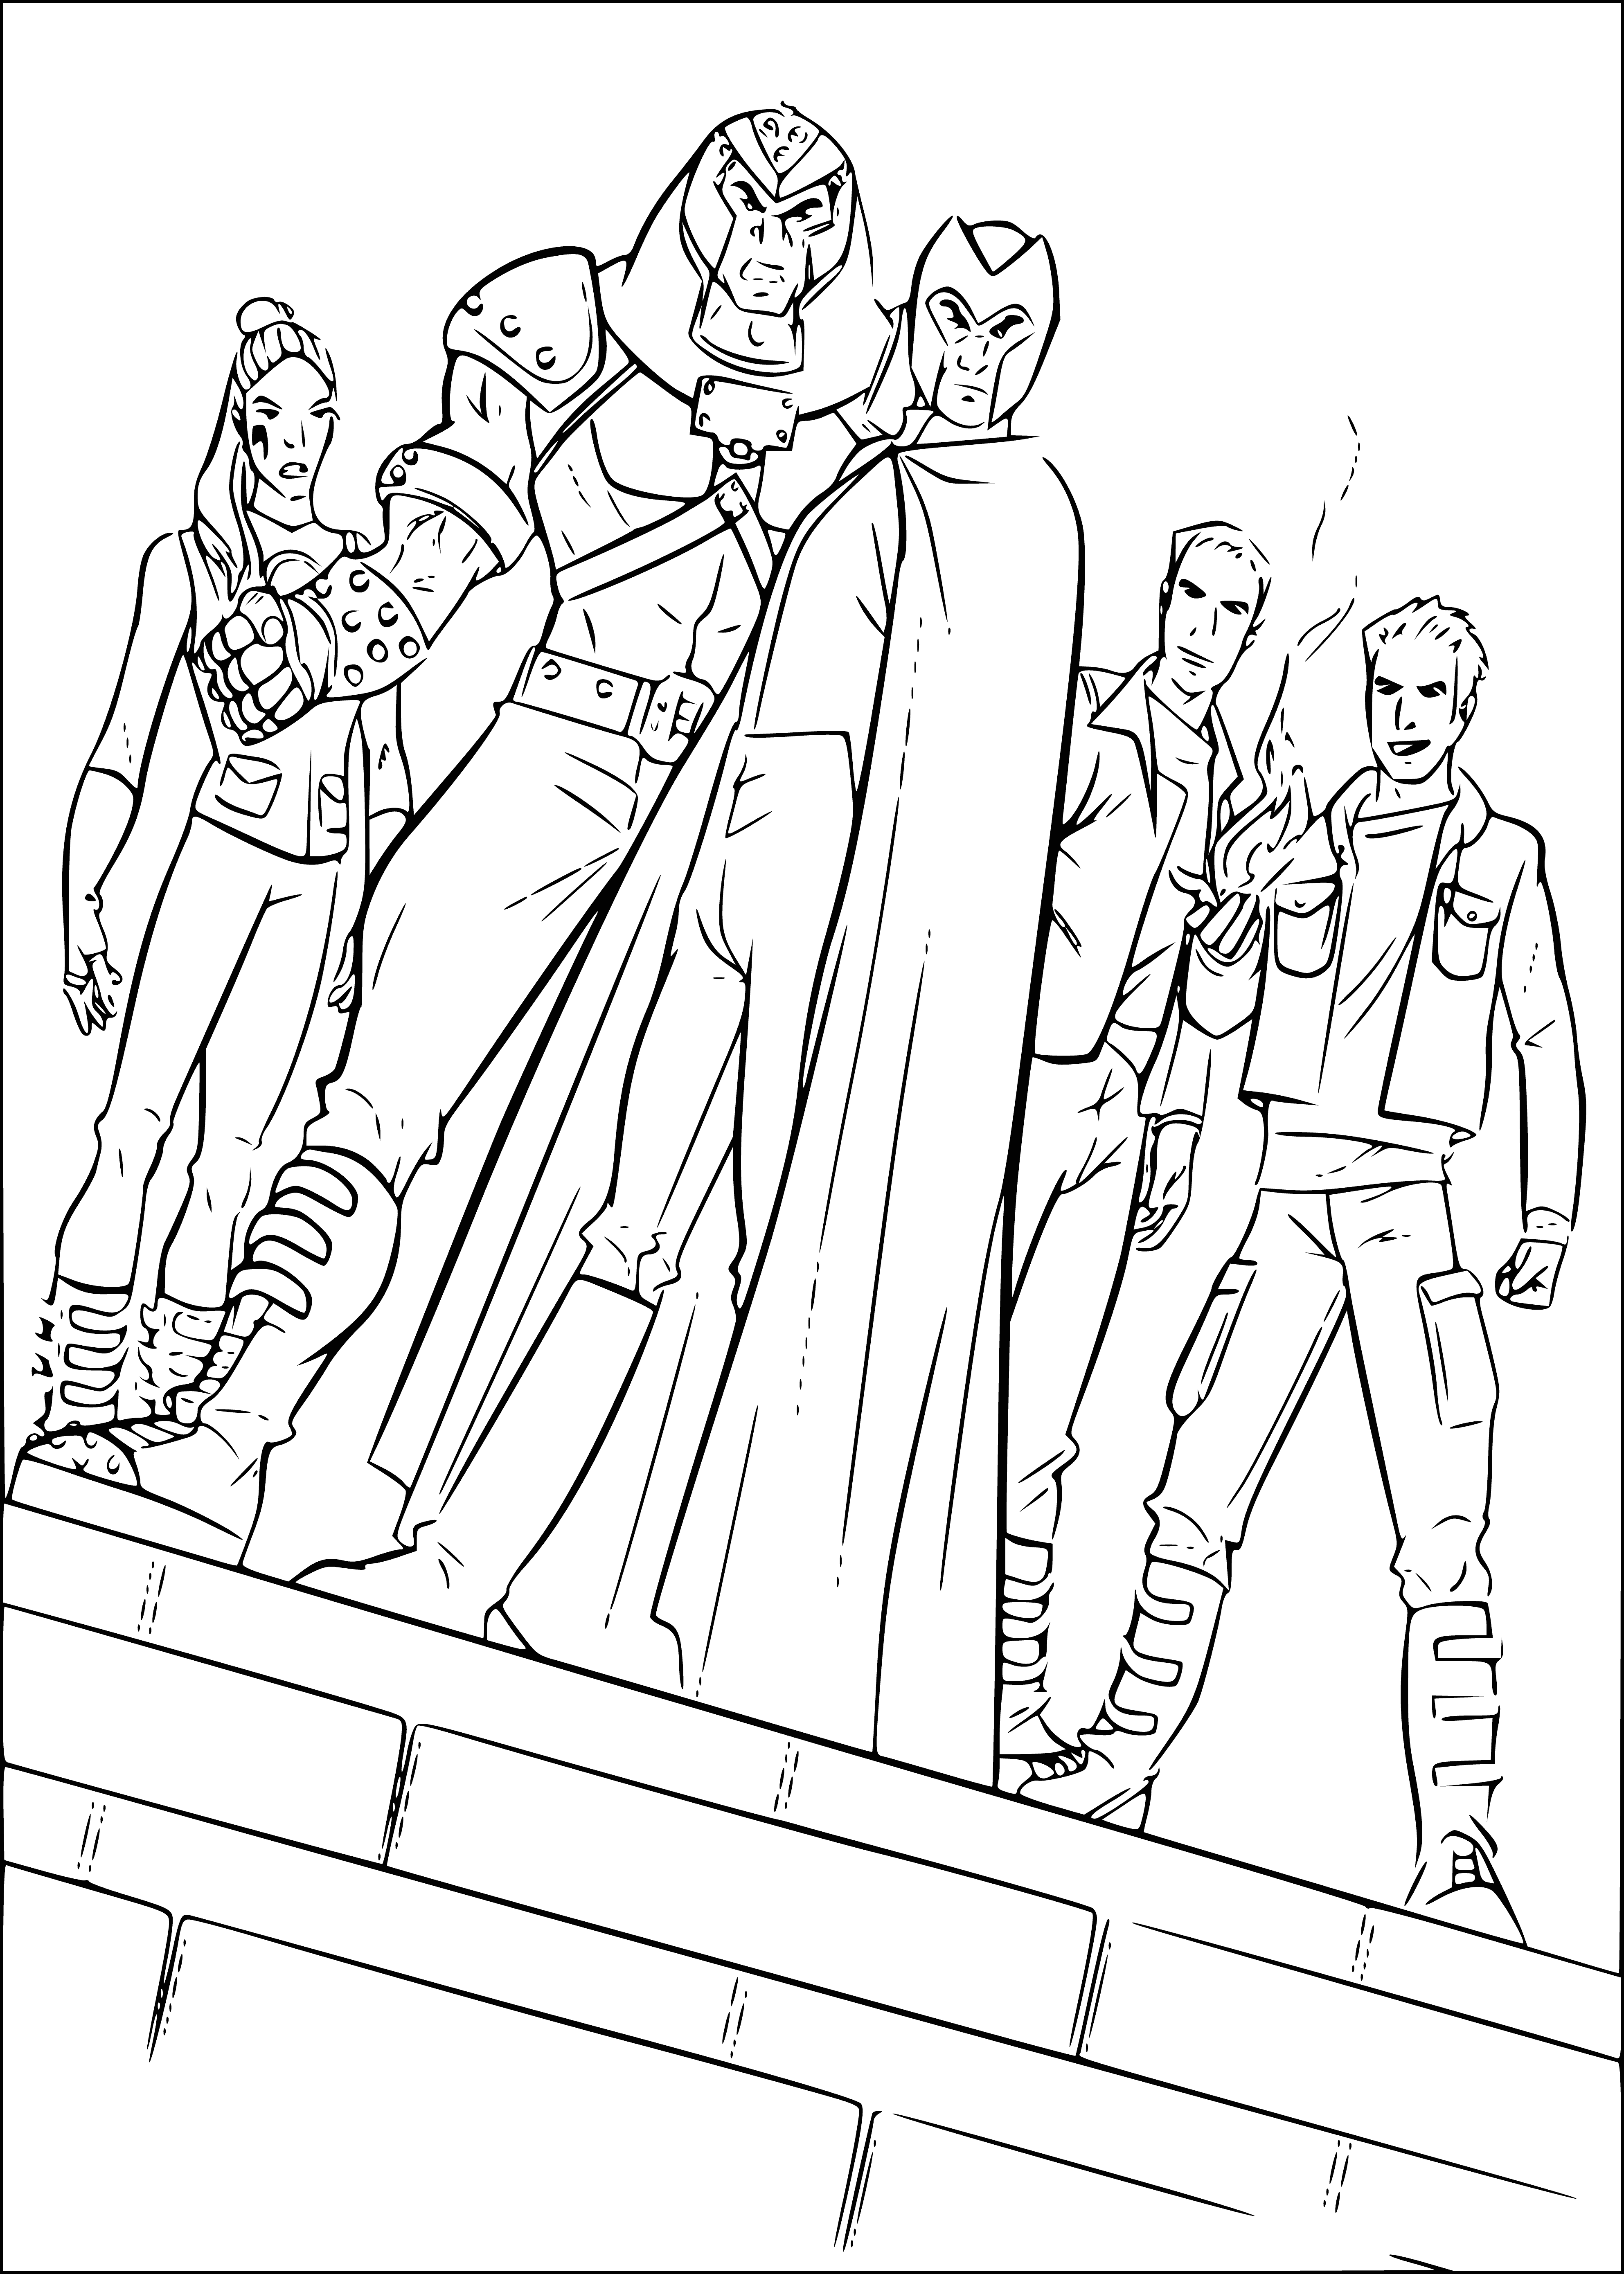 coloring page: Man in metal suit holds metal ball and is standing on metal platform, while another lies on the ground, stabbed with a metal rod, wearing blue suit and mask. Eyes of man in metal suit glow red.